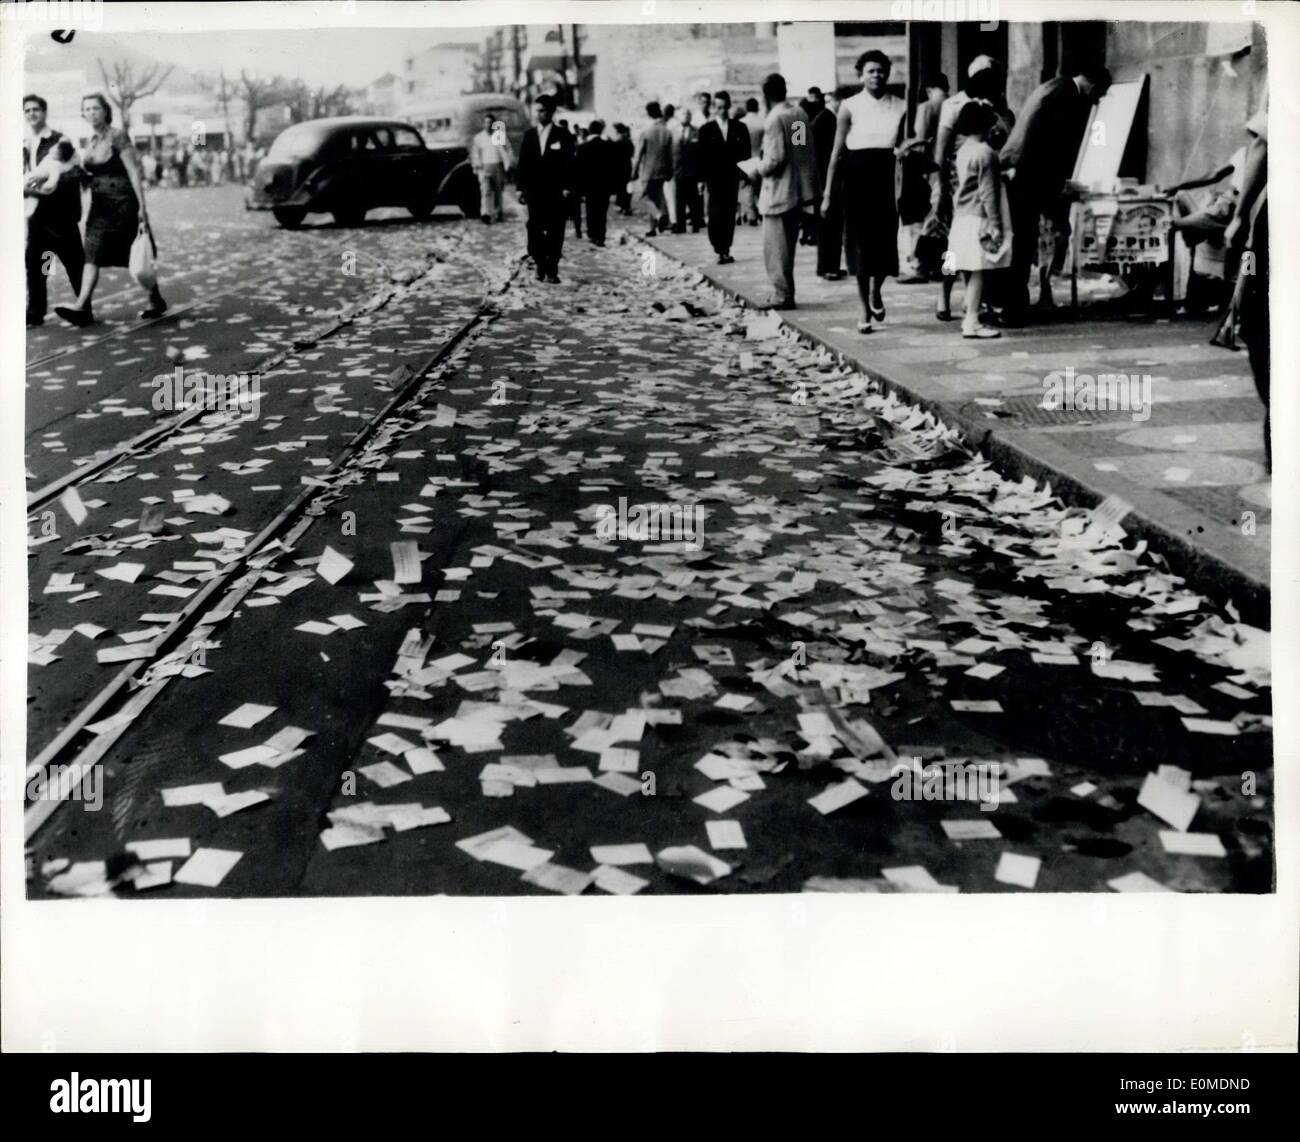 Oct. 15, 1954 - Congressional Elections In Brazil: Pamphlets Over The Roadway: More than 15,000,000 persons were eligible to vote in the recent Brazilian elections - in which 1,200 candidates stood for the 69 places - to decide the composition of the new Congress and two - thirds of the Senate. In addition 11 new governors are being elected. The election follows the death and sudden downfall of Dr. Vargas.. The result of the elections will not be known for some weeks - but it is expected that the Conservative Party will have a big lead Stock Photo